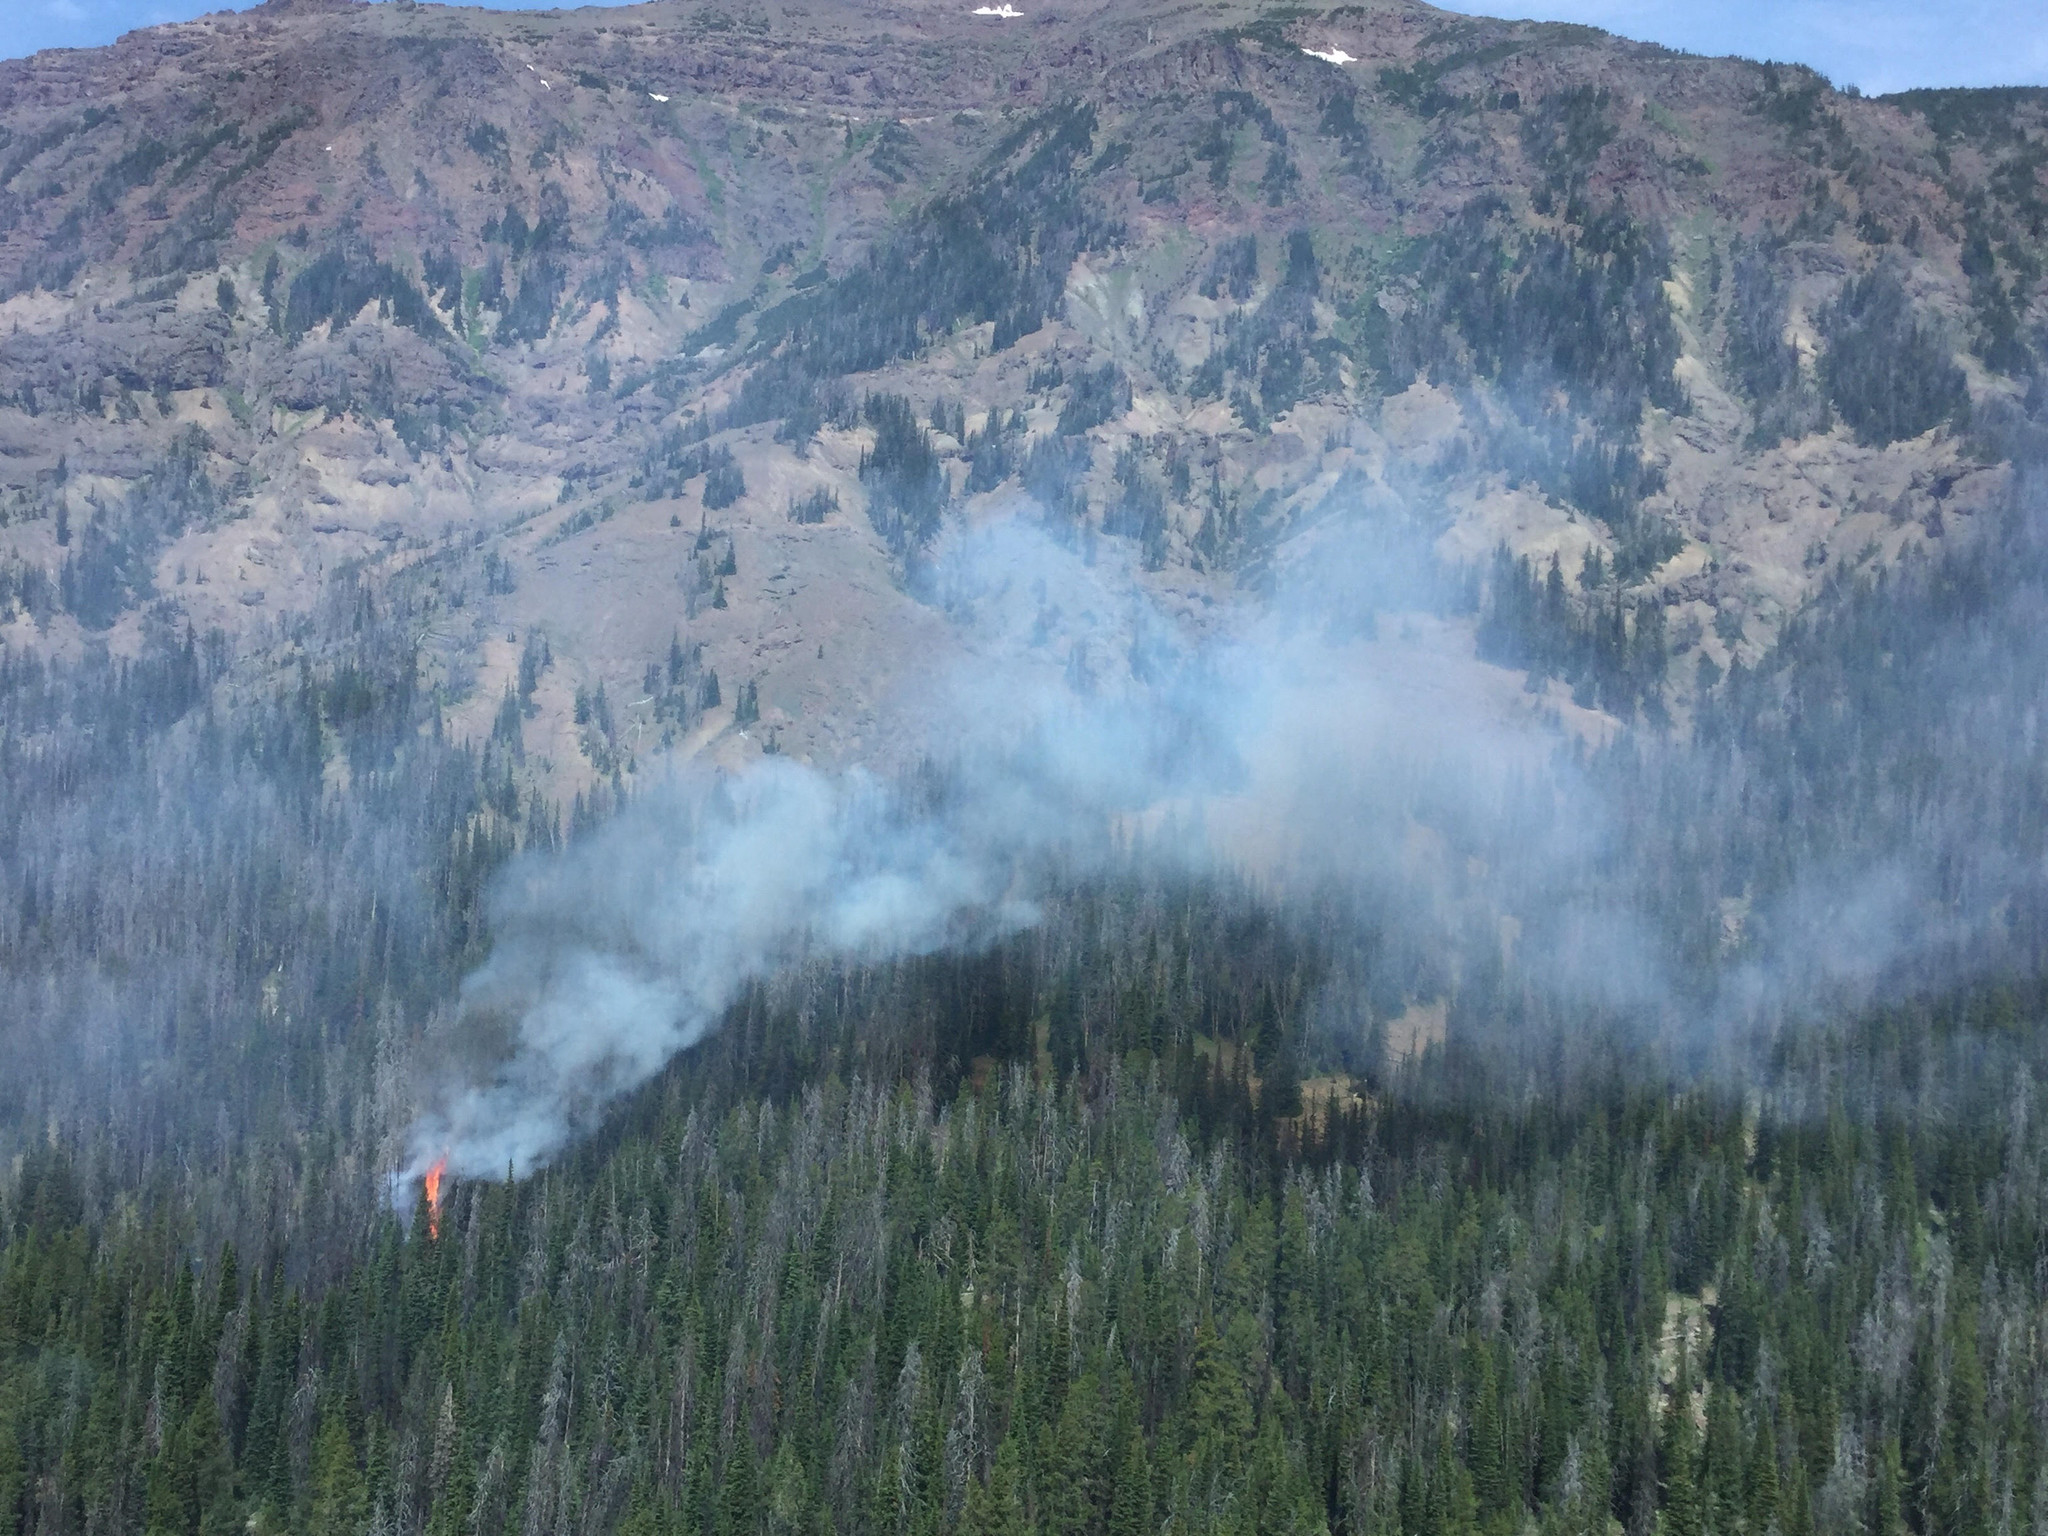 flames from a small wildfire in mountainous terrain